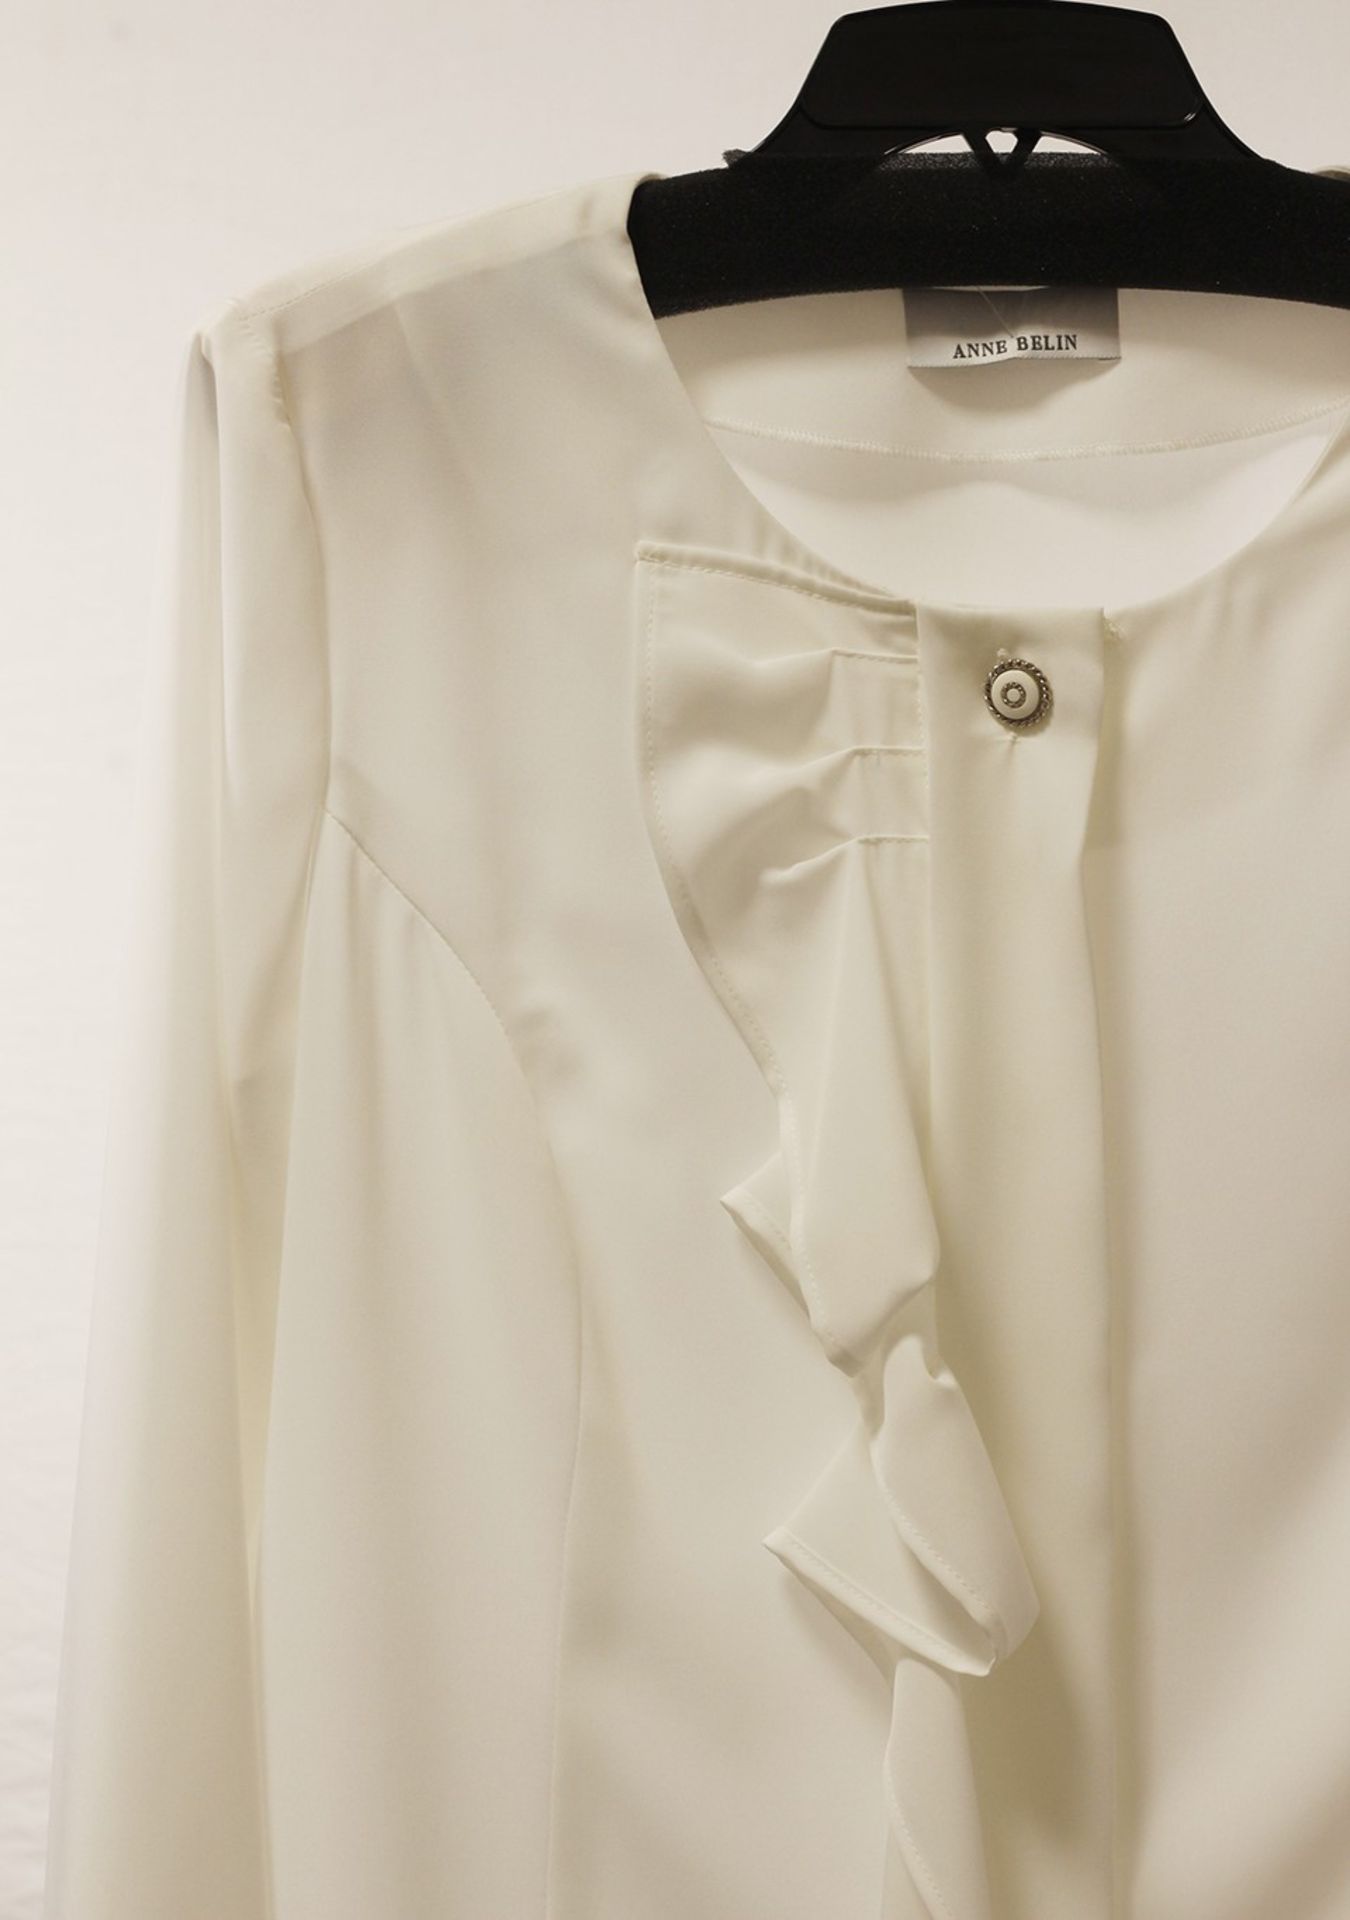 1 x Anne Belin White Shirt - Size: 18 - Material: 100% Polyester - From a High End Clothing Boutique - Image 5 of 9